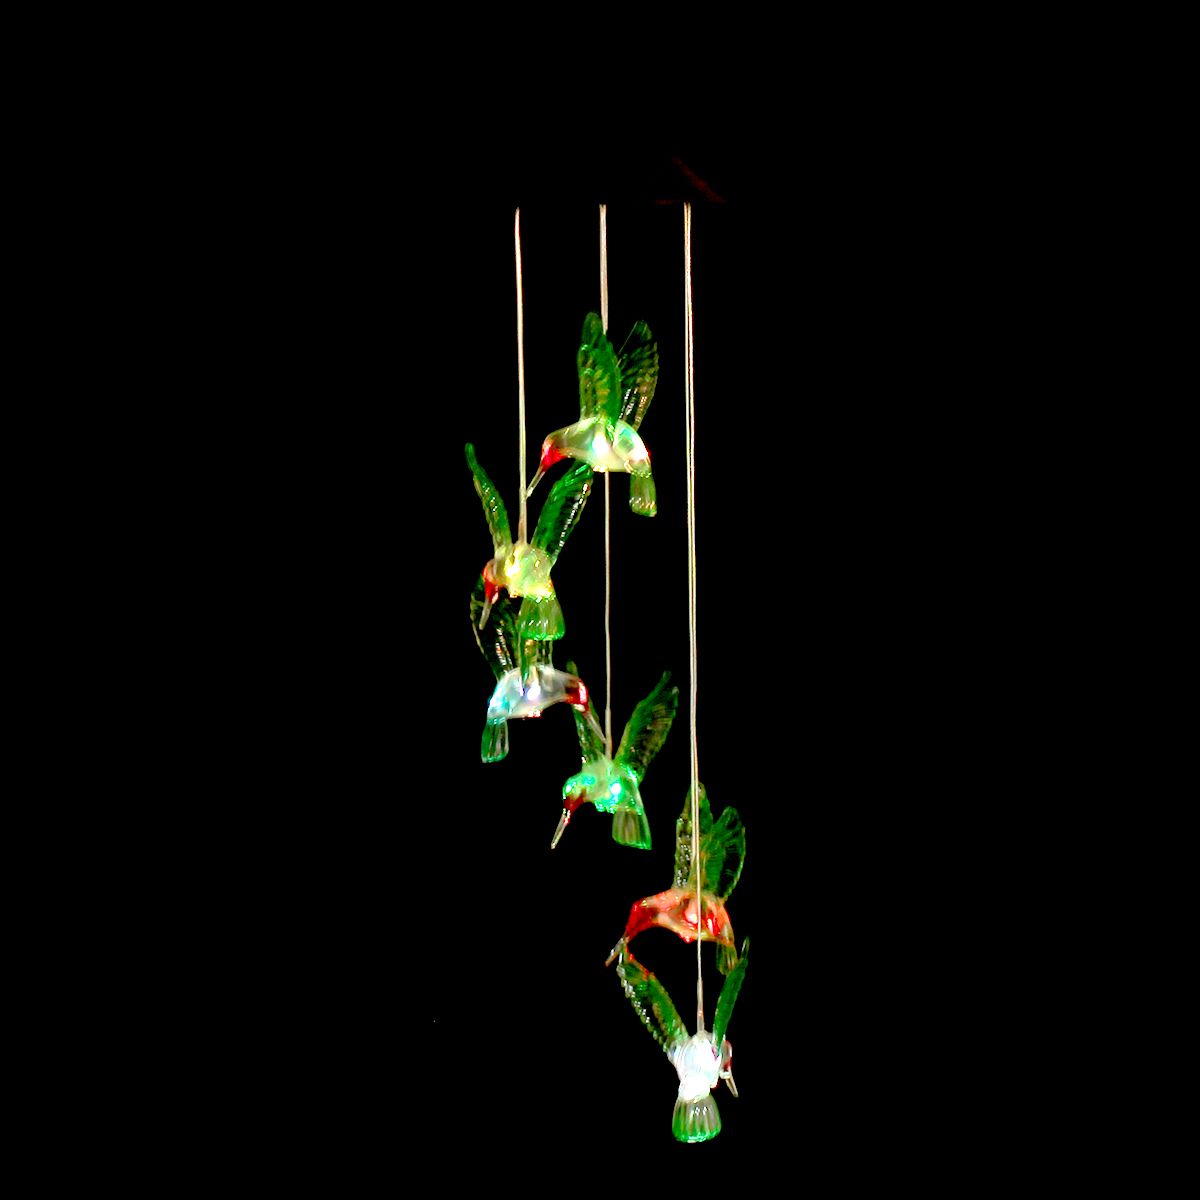 LED-Solar-Light-Waterproof-Outdoor-Hanging-Colorful-Hummingbird-Bell-Light-Wind-Chimes-Lamp-Decor-1688922